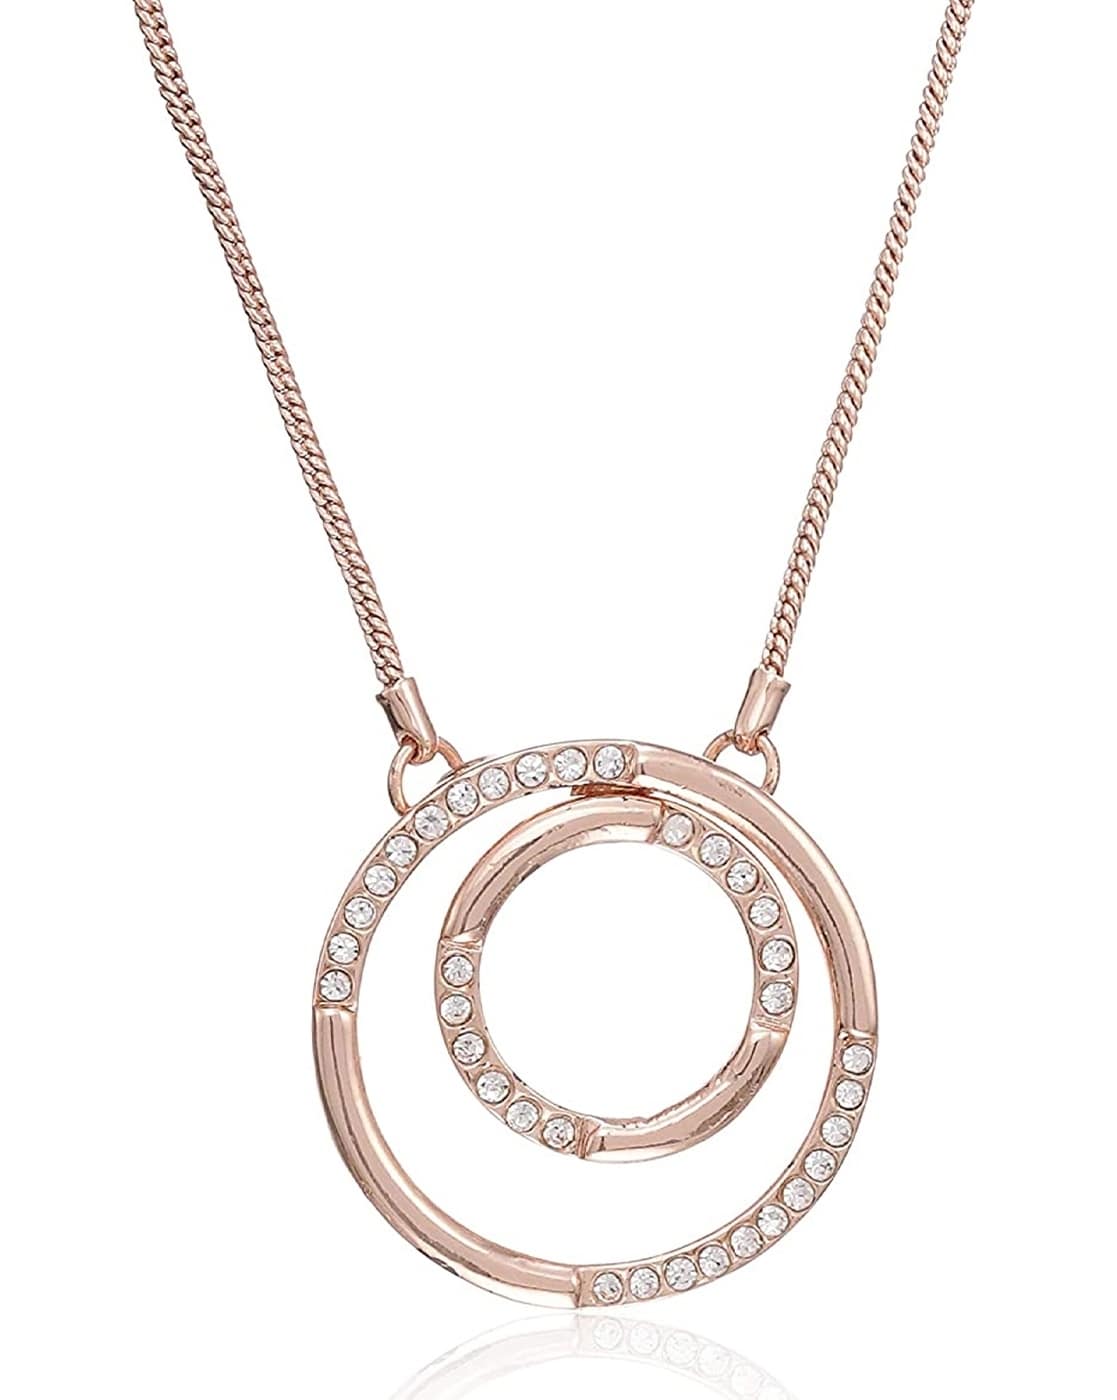 Infinity Necklace Rose Gold, Interlocking Circle Necklace for Women, Simple  Mother Daughter Double Circle Pendant, Bridesmaid Jewelry Gifts - Etsy